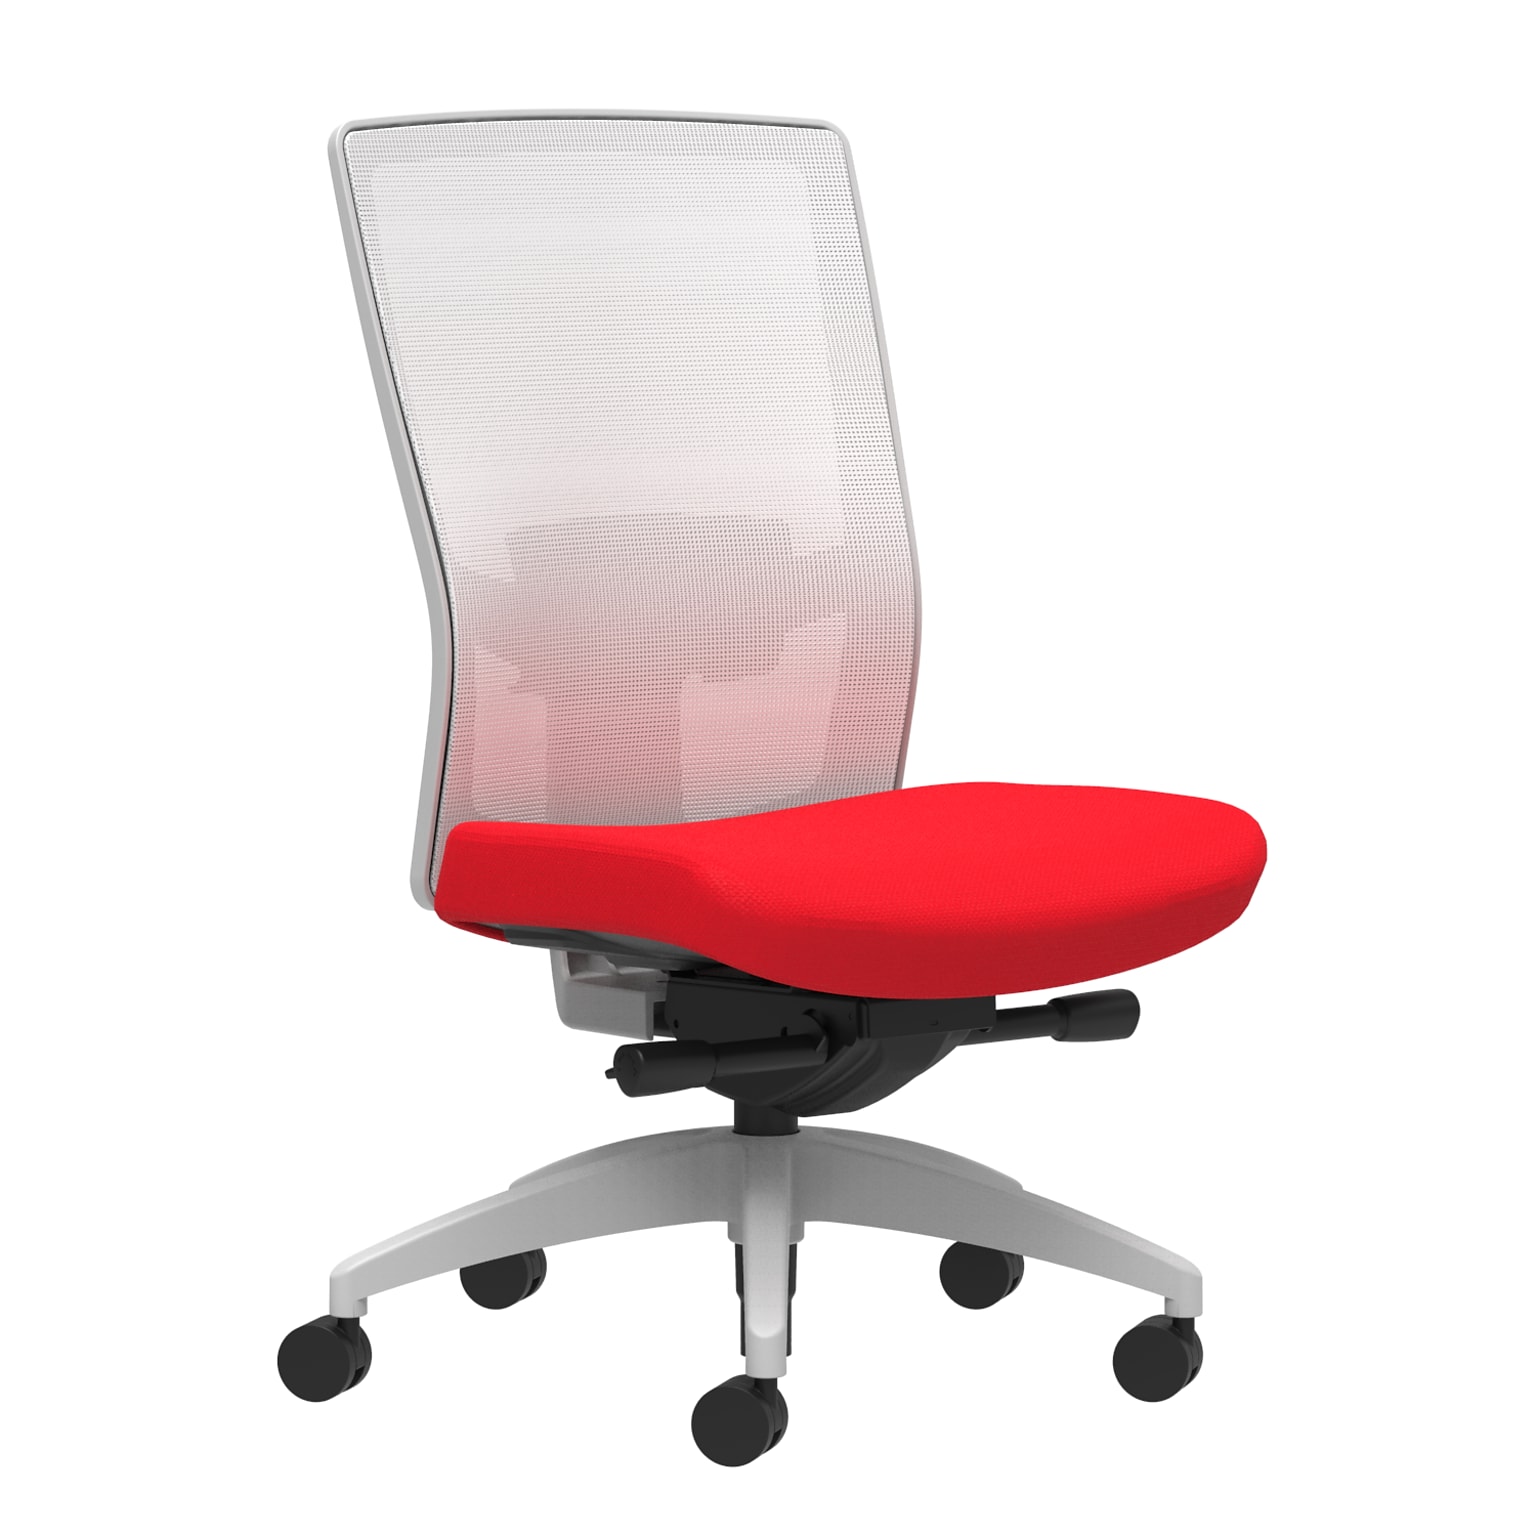 Union & Scale Workplace2.0™ Fabric Task Chair, Ruby Red, Adjustable Lumbar, Armless, Advanced Synchro-Tilt Seat Control 53575)